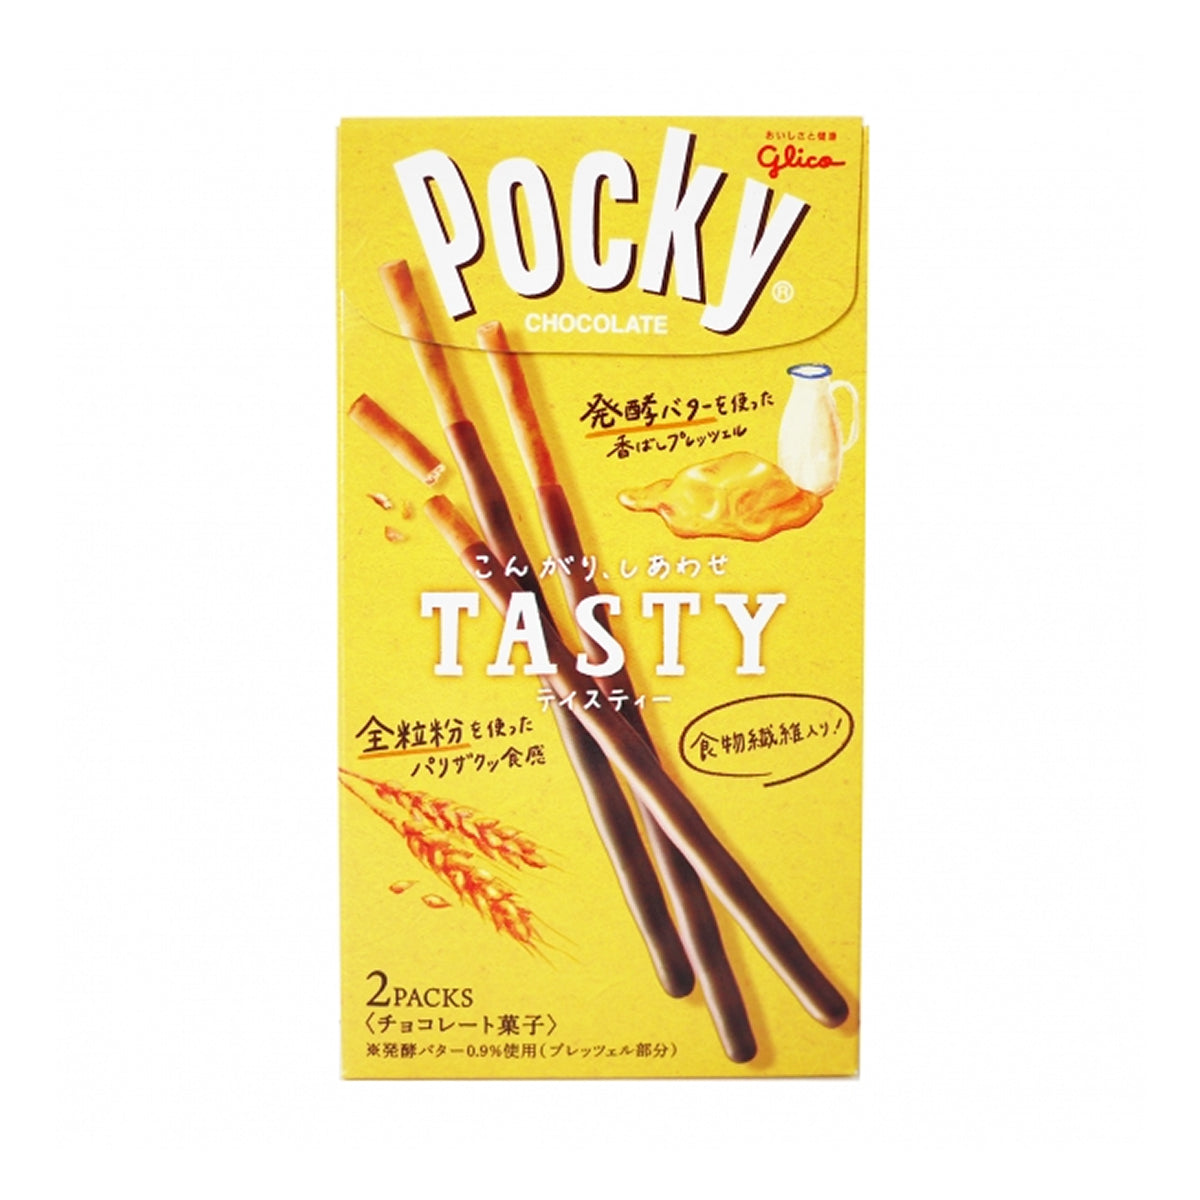 pocky chocolate tasty milk and butter biscuit sticks - 2.65oz